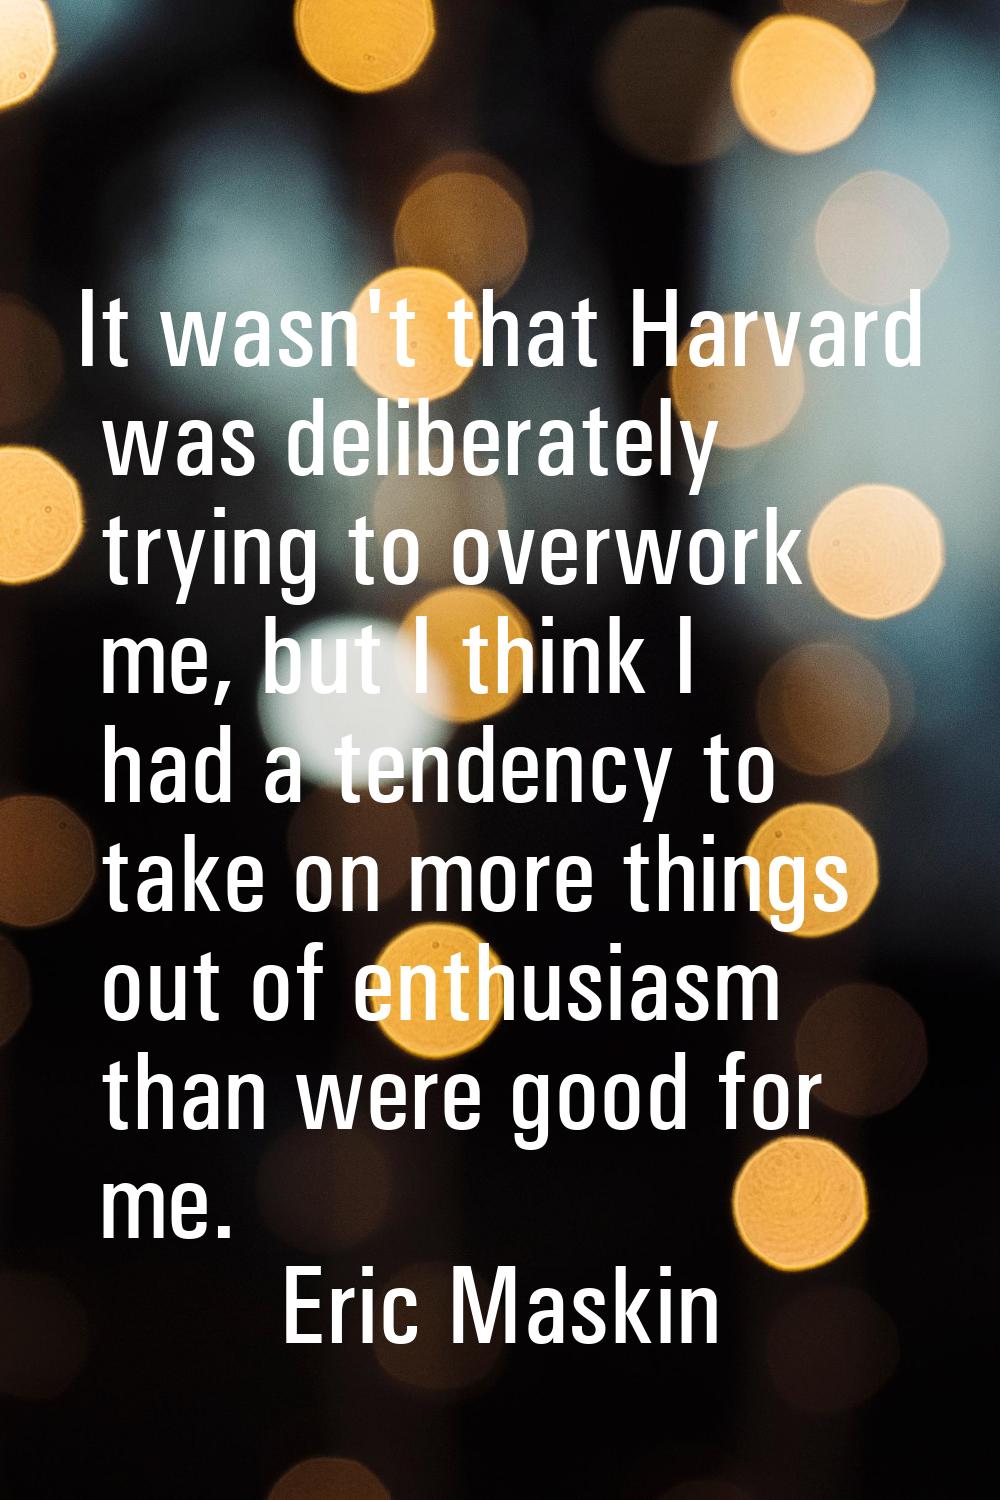 It wasn't that Harvard was deliberately trying to overwork me, but I think I had a tendency to take